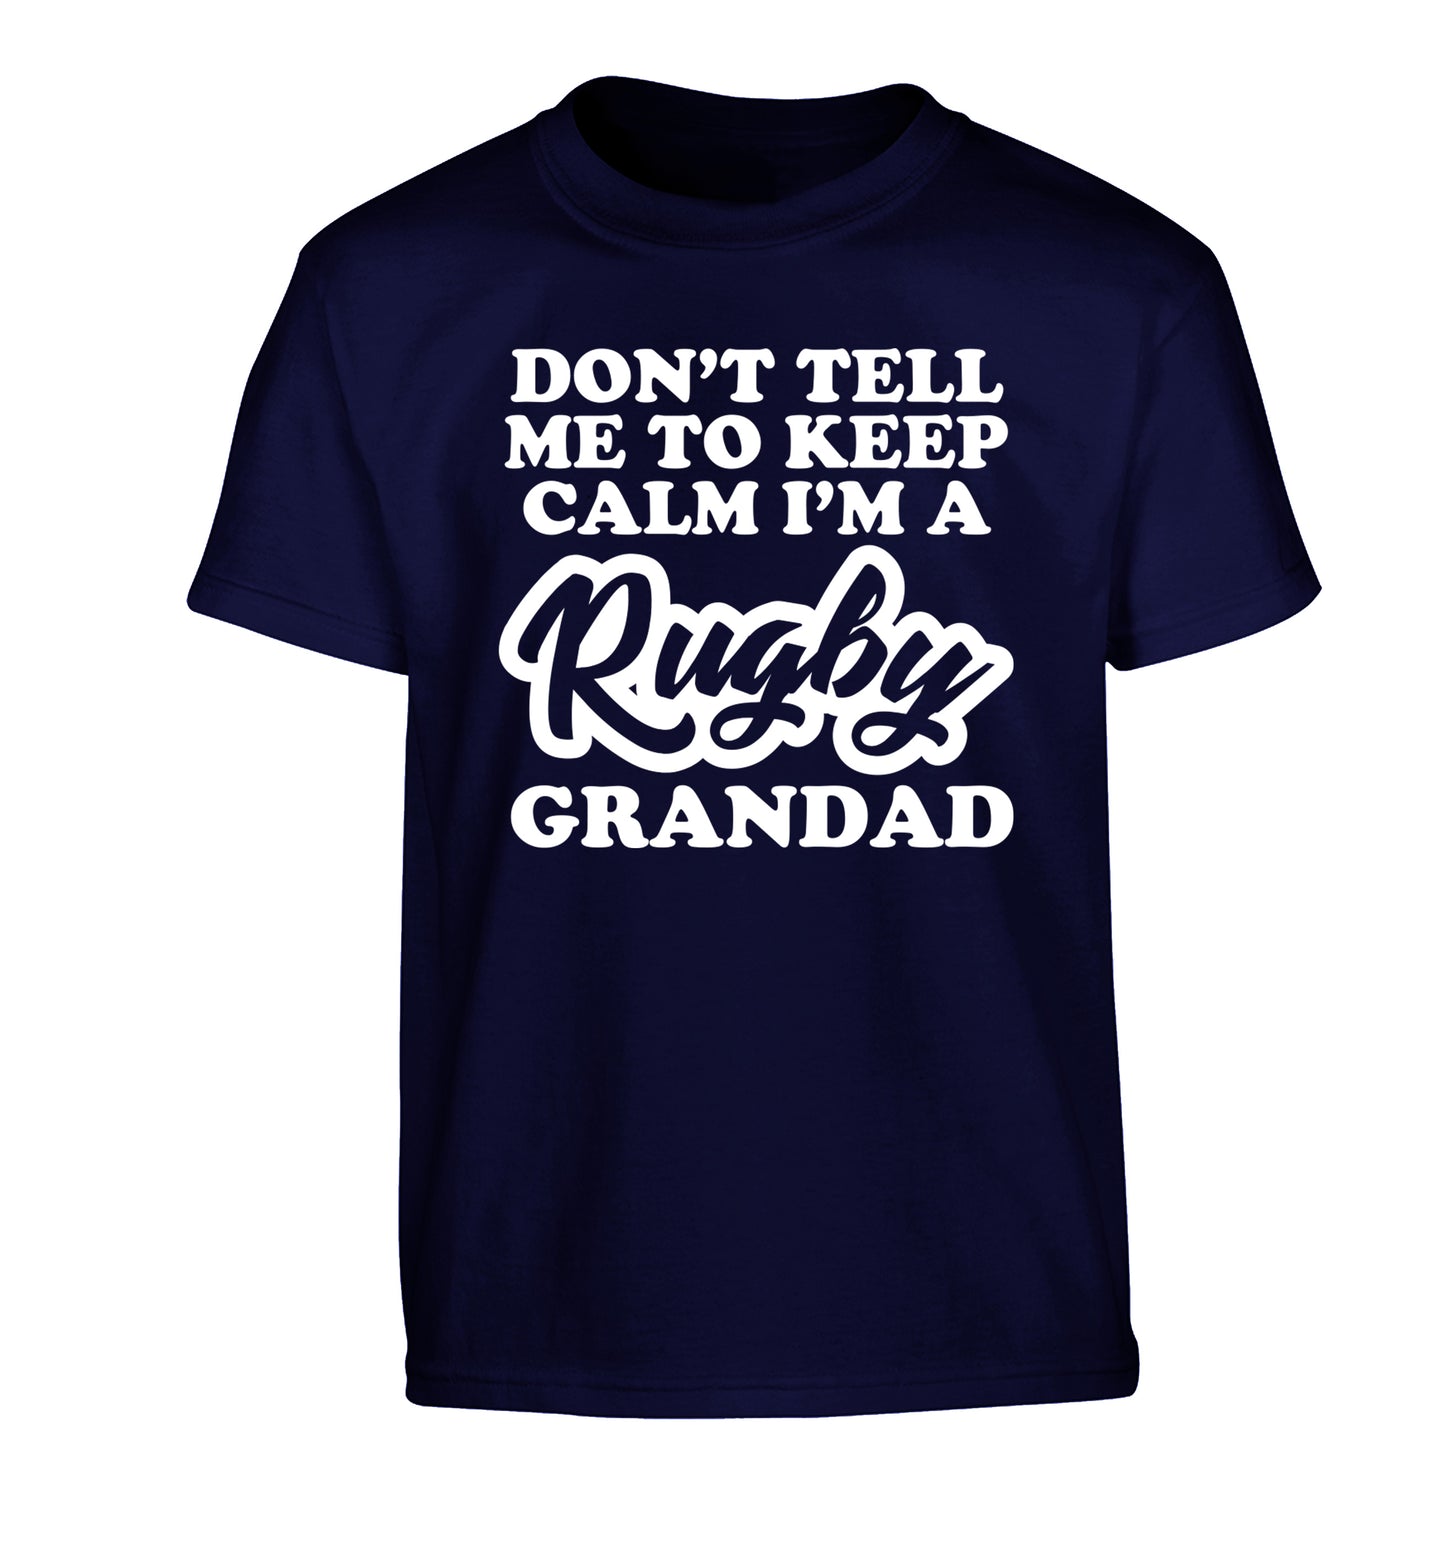 Don't tell me to keep calm I'm a rugby dad Children's navy Tshirt 12-13 Years